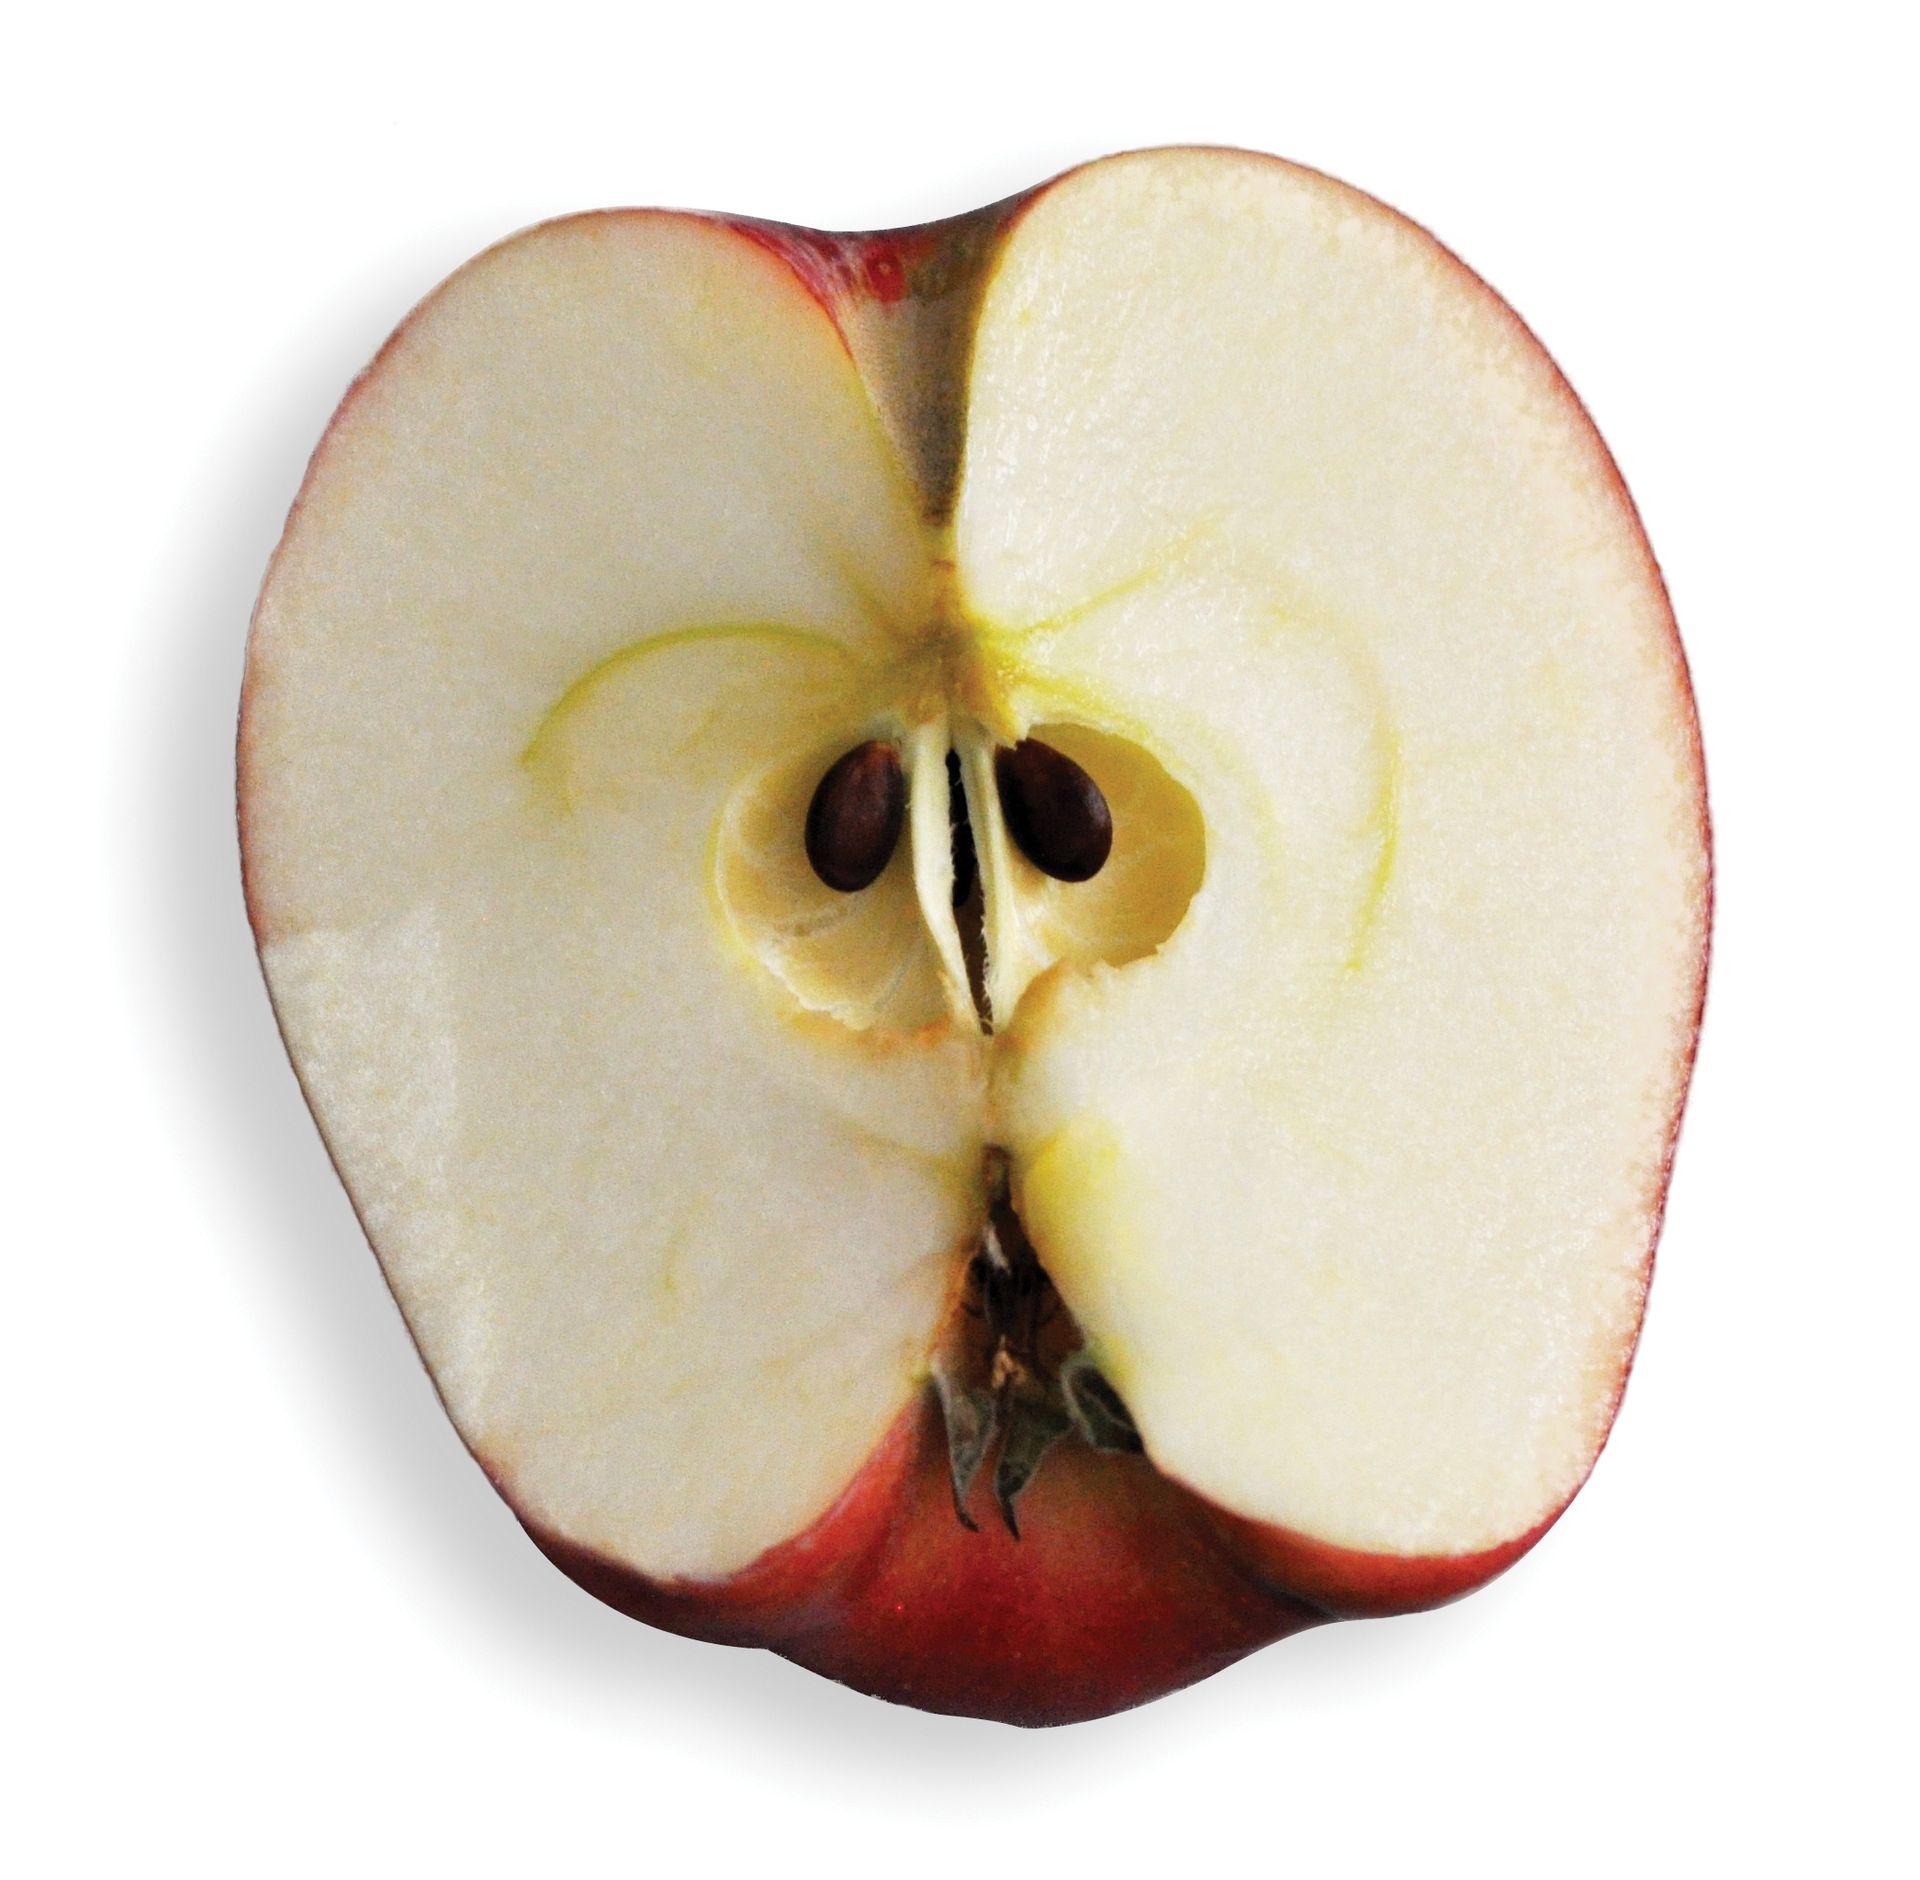 A portion of a sliced apple with two seeds showing.